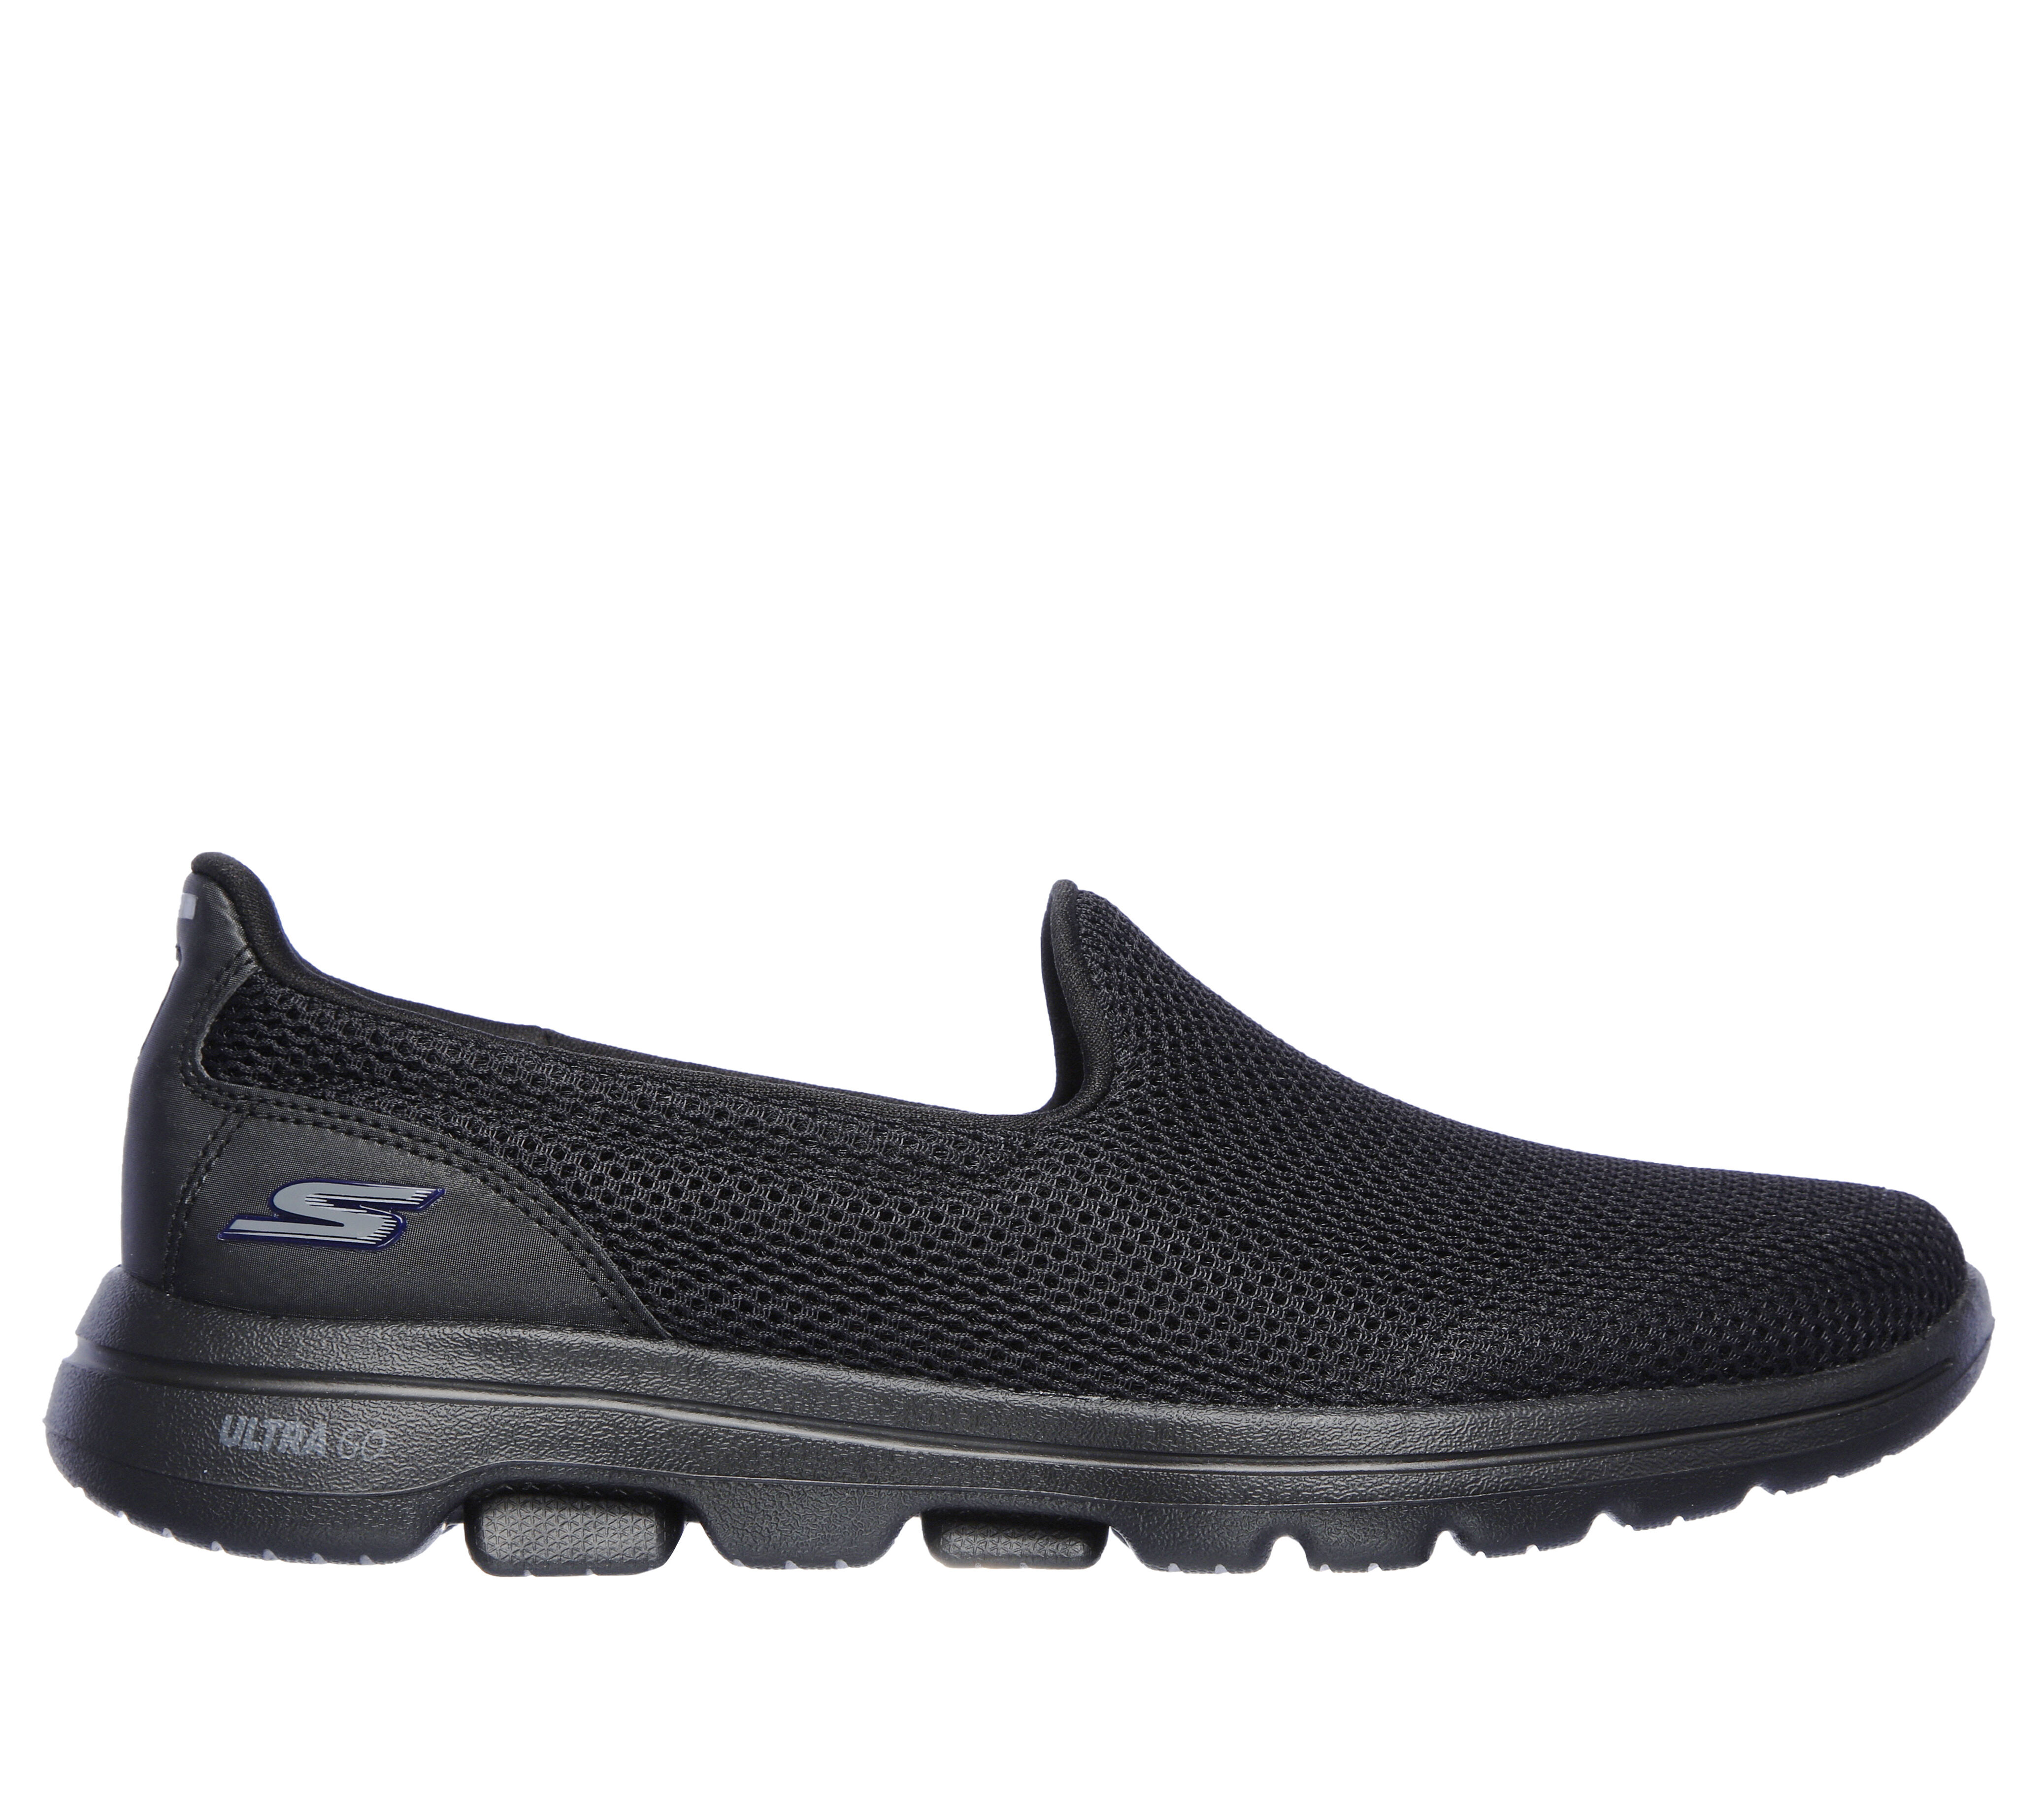 shoes skechers canada